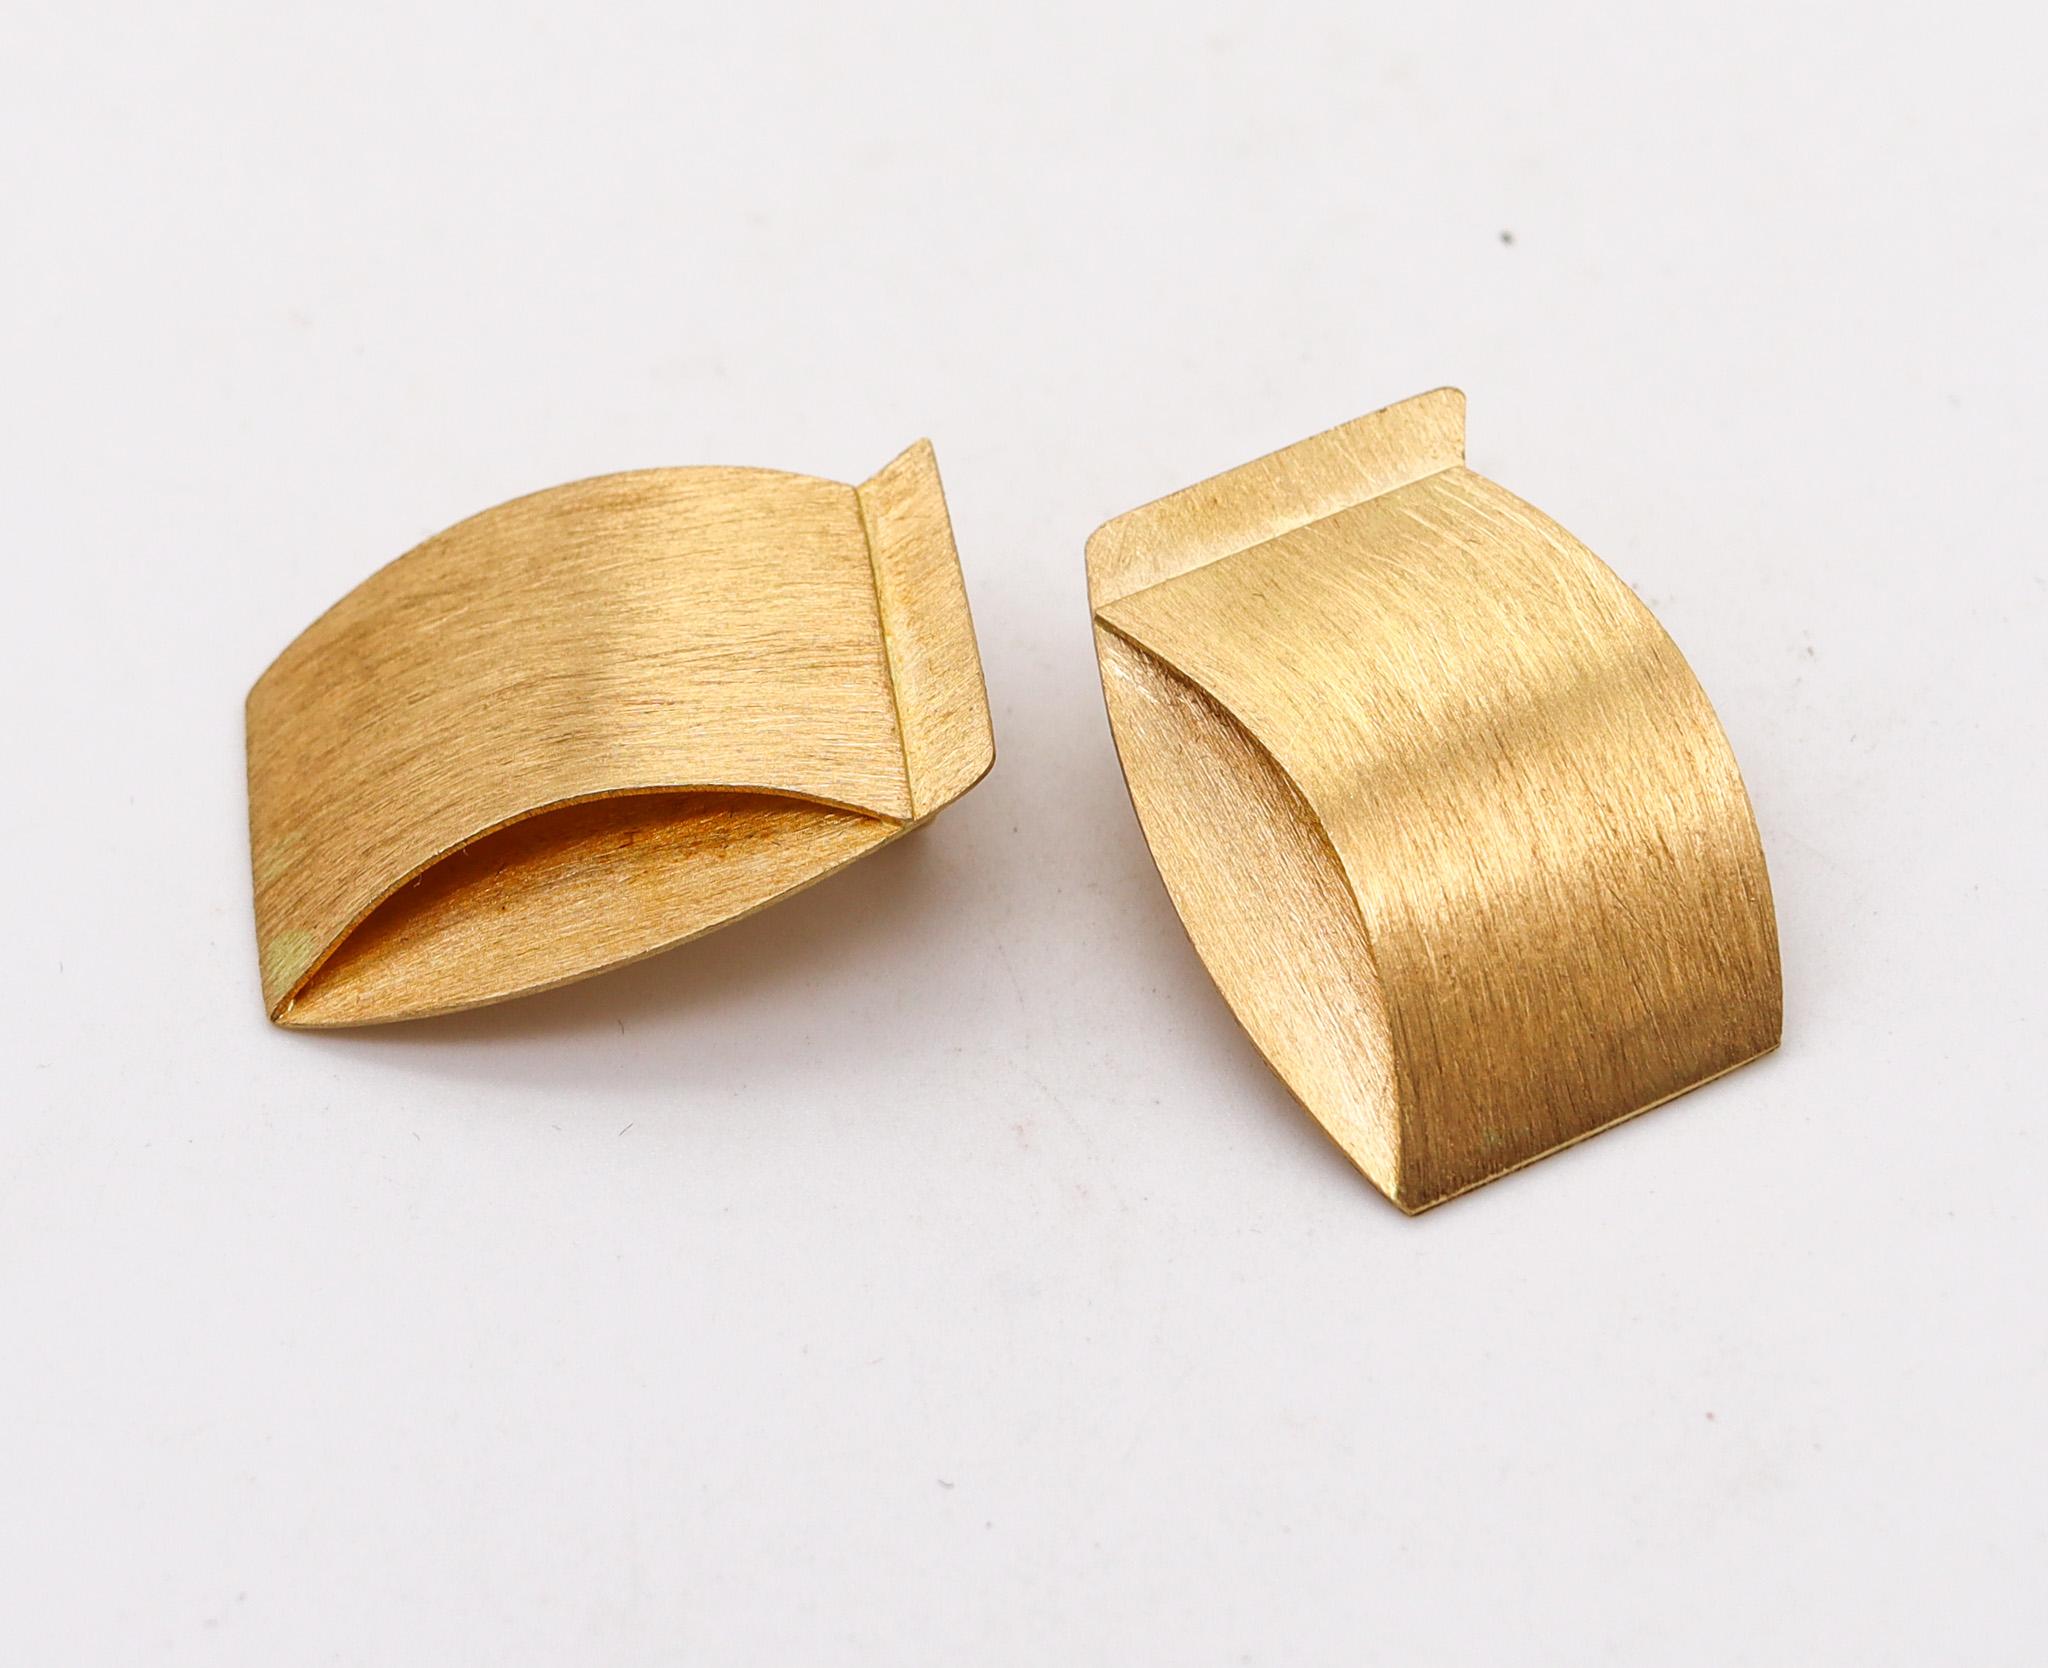 Modernist Giampaolo Babetto 1984 Geometric Folded Earrings In Brushed 18Kt Yellow Gold For Sale